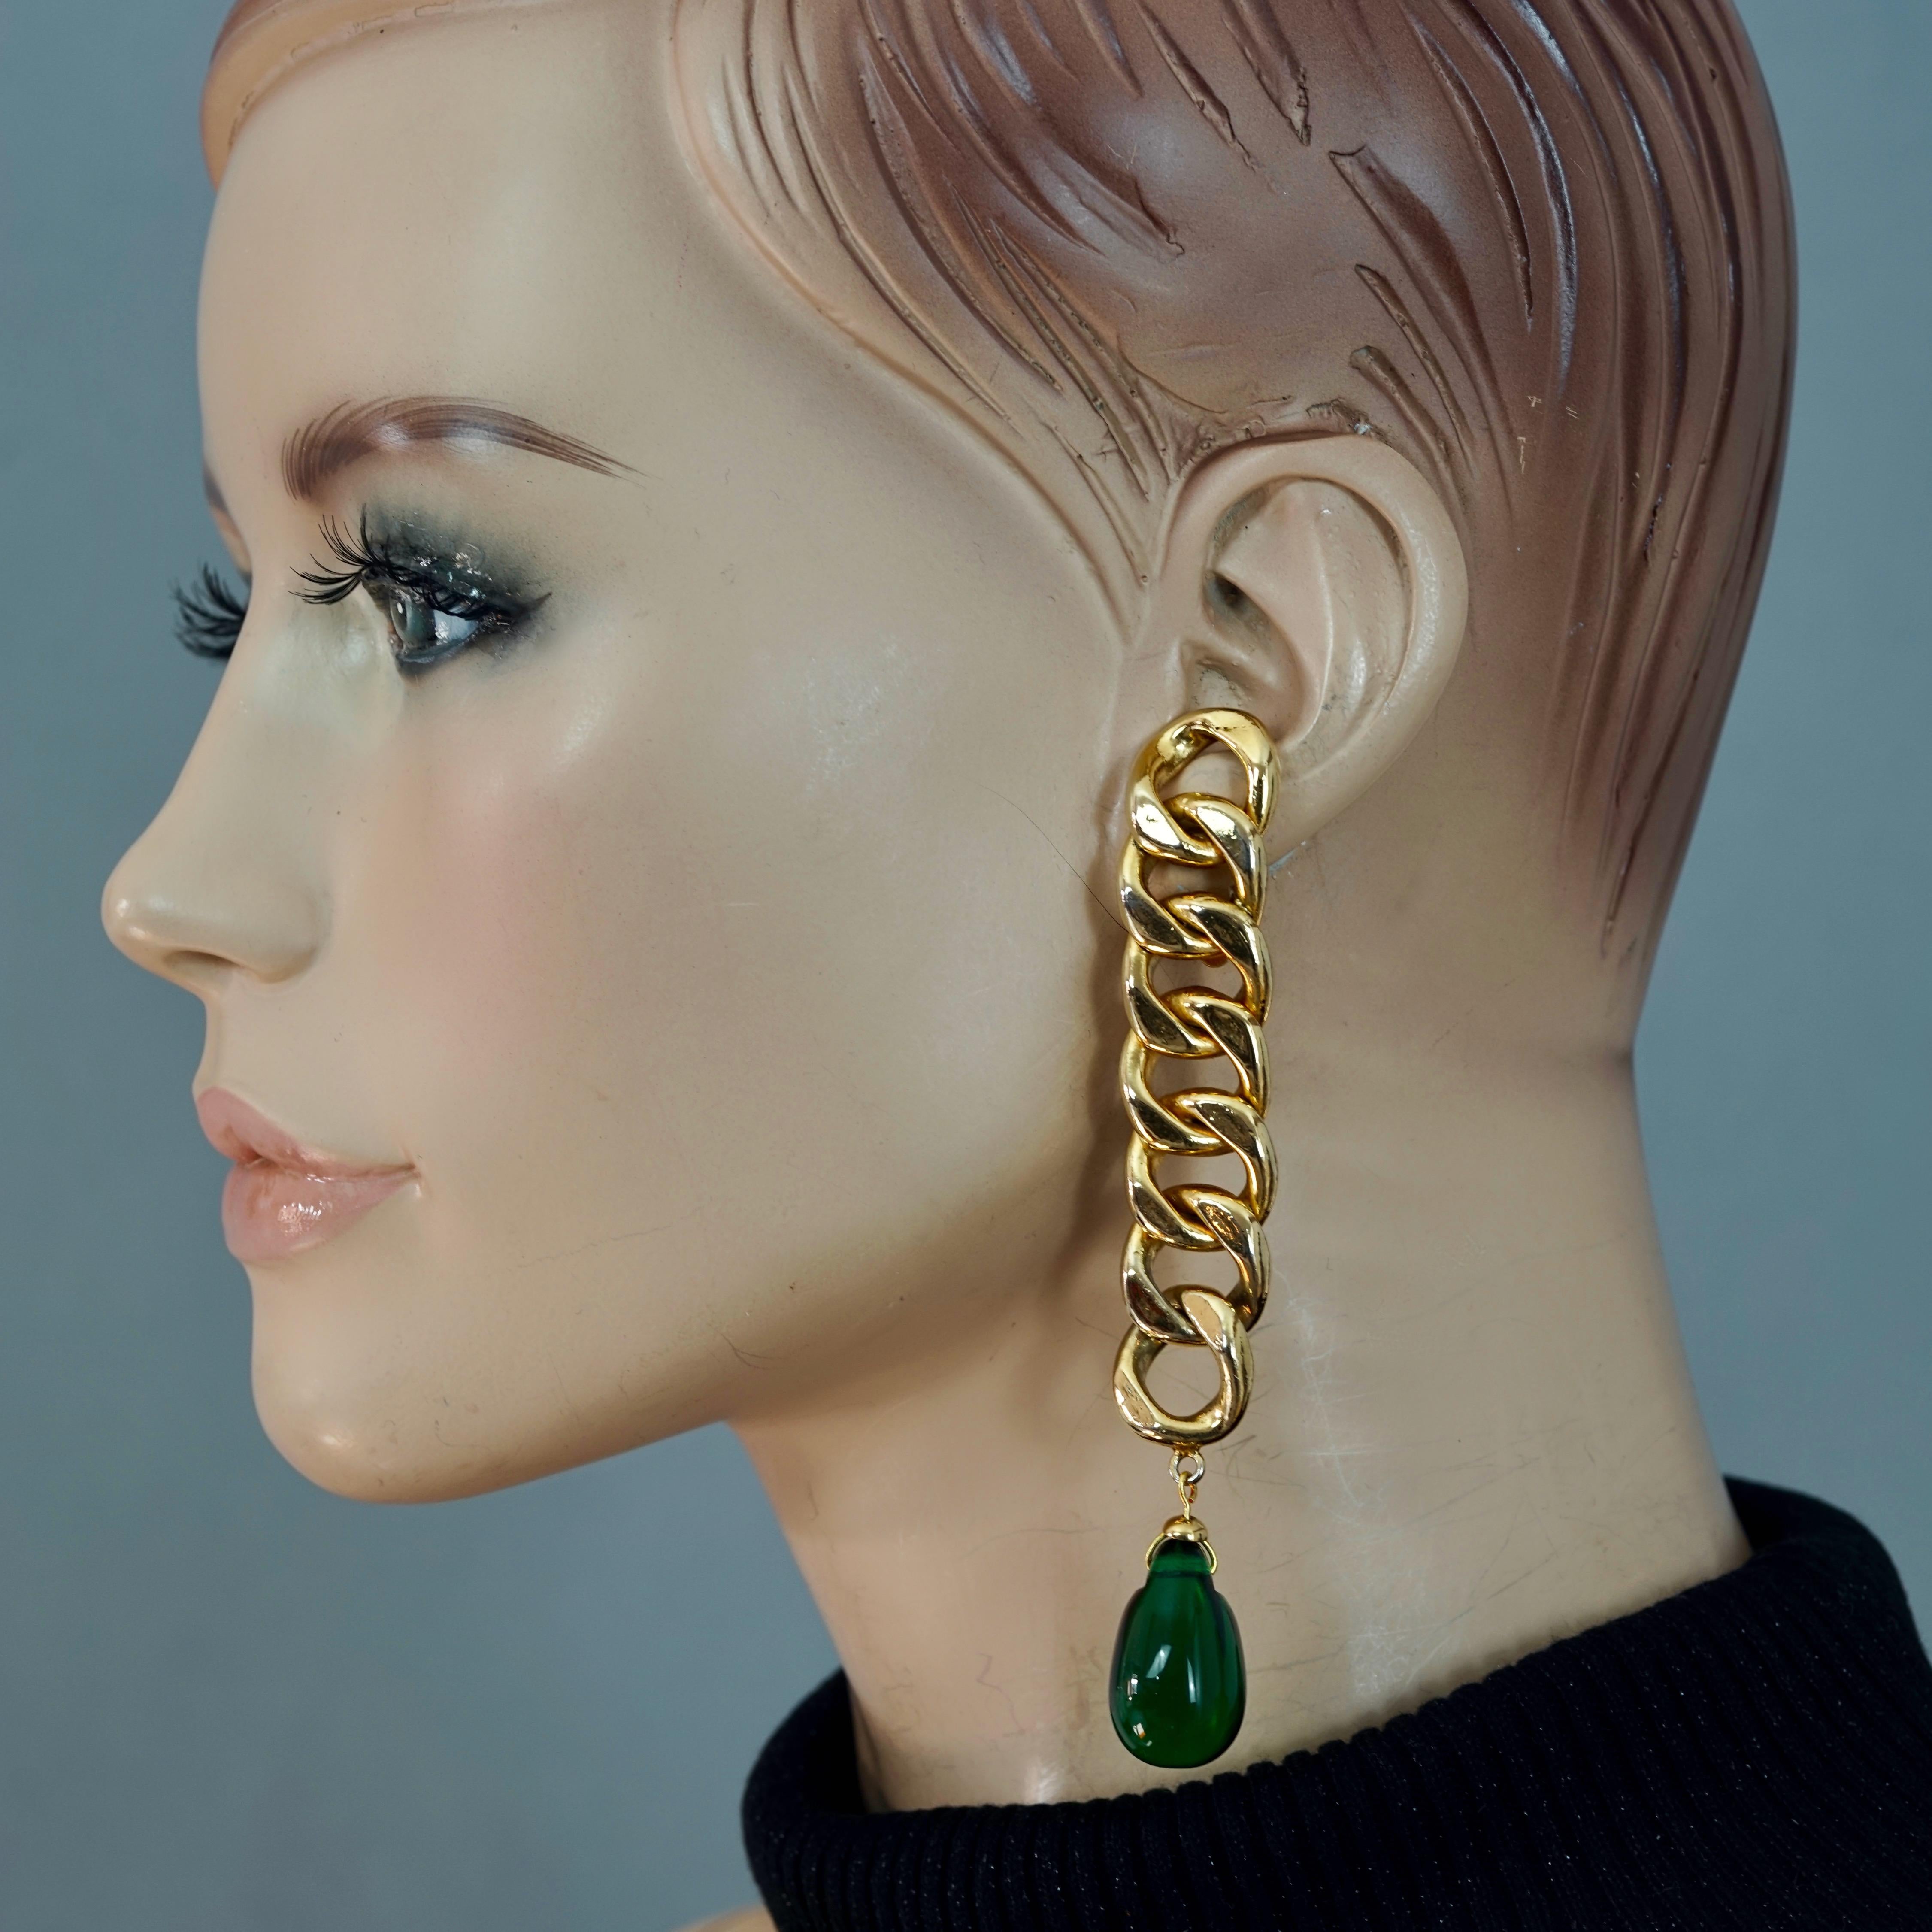 Vintage CHANEL Long Chain Green Glass Drop Earrings

Measurements:
Height: 4.13 inches (10.5 cms)
Width: 0.67 inch (1.7 cms)
Weight per Earring: 29 grams

Features:
- 100% Authentic CHANEL.
- Long classic chain earrings with dangling green glass